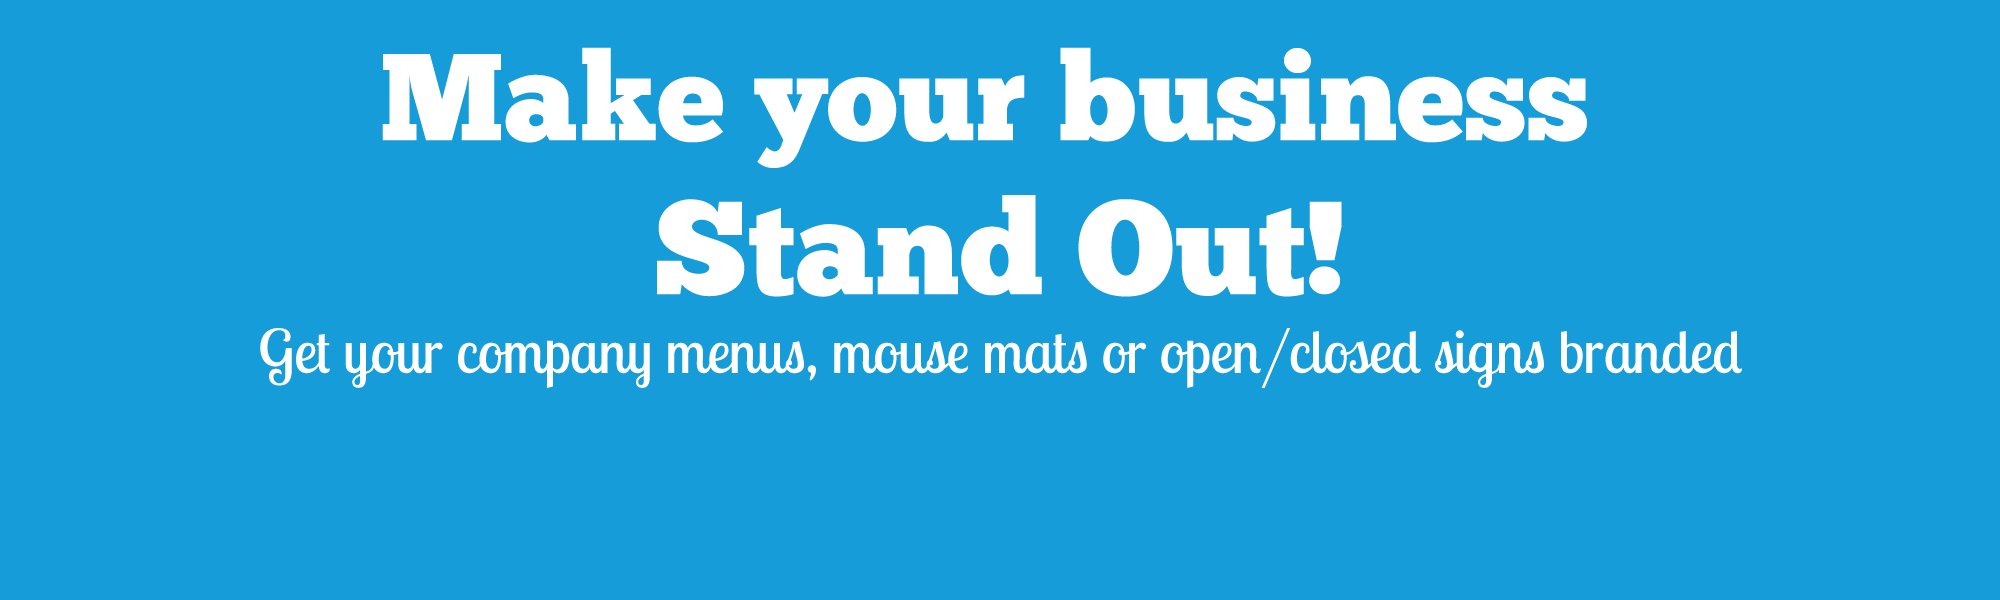 Make your business stand out banner